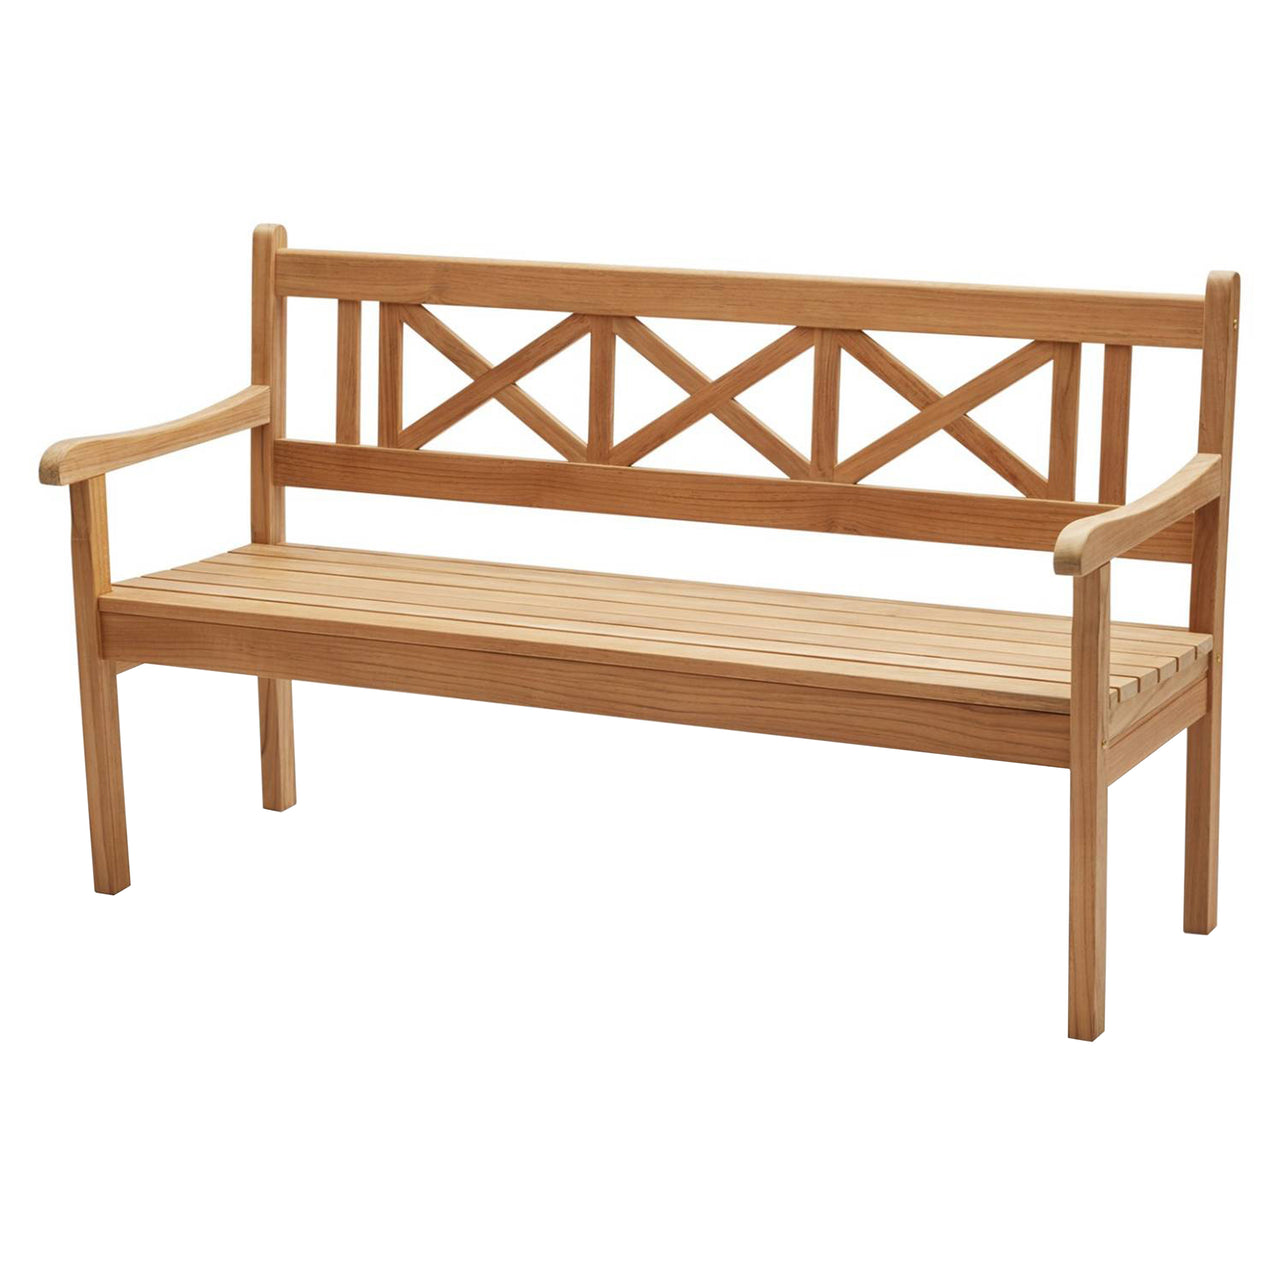 Skagen Bench: Without Cushion